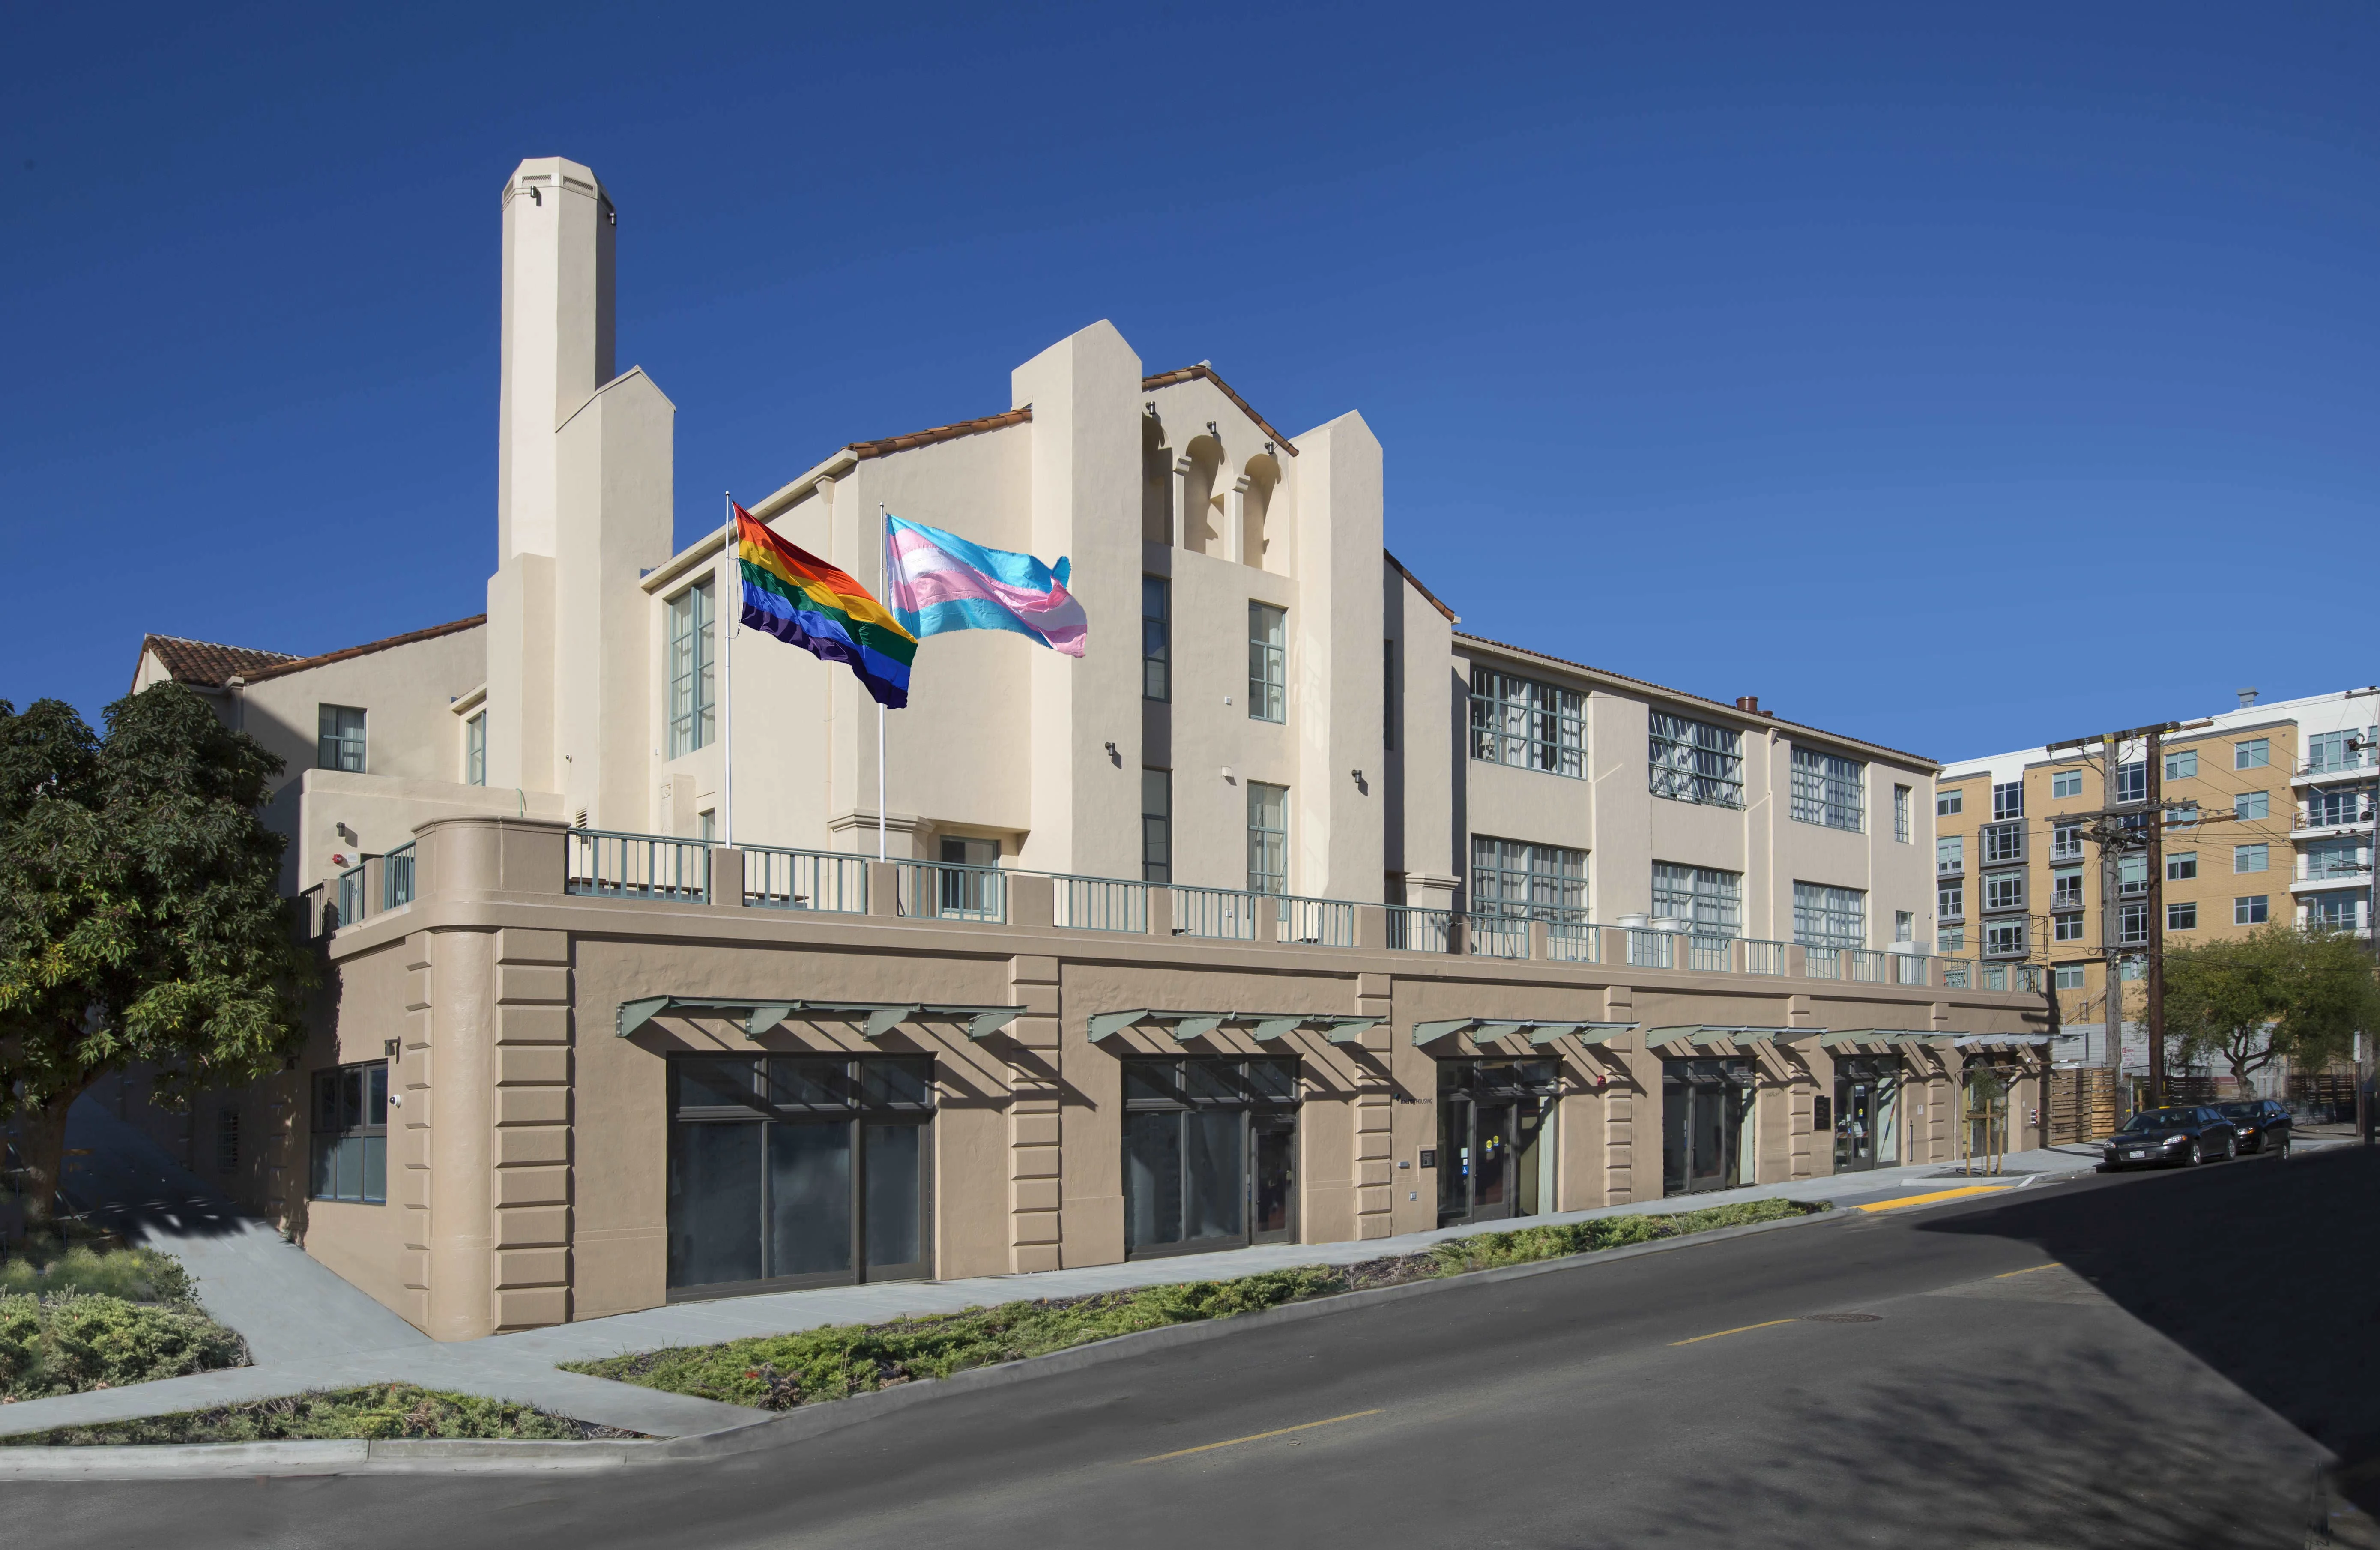 A front view of OnLok's location with the LGBTQ and Trans flag waving on a flagpole